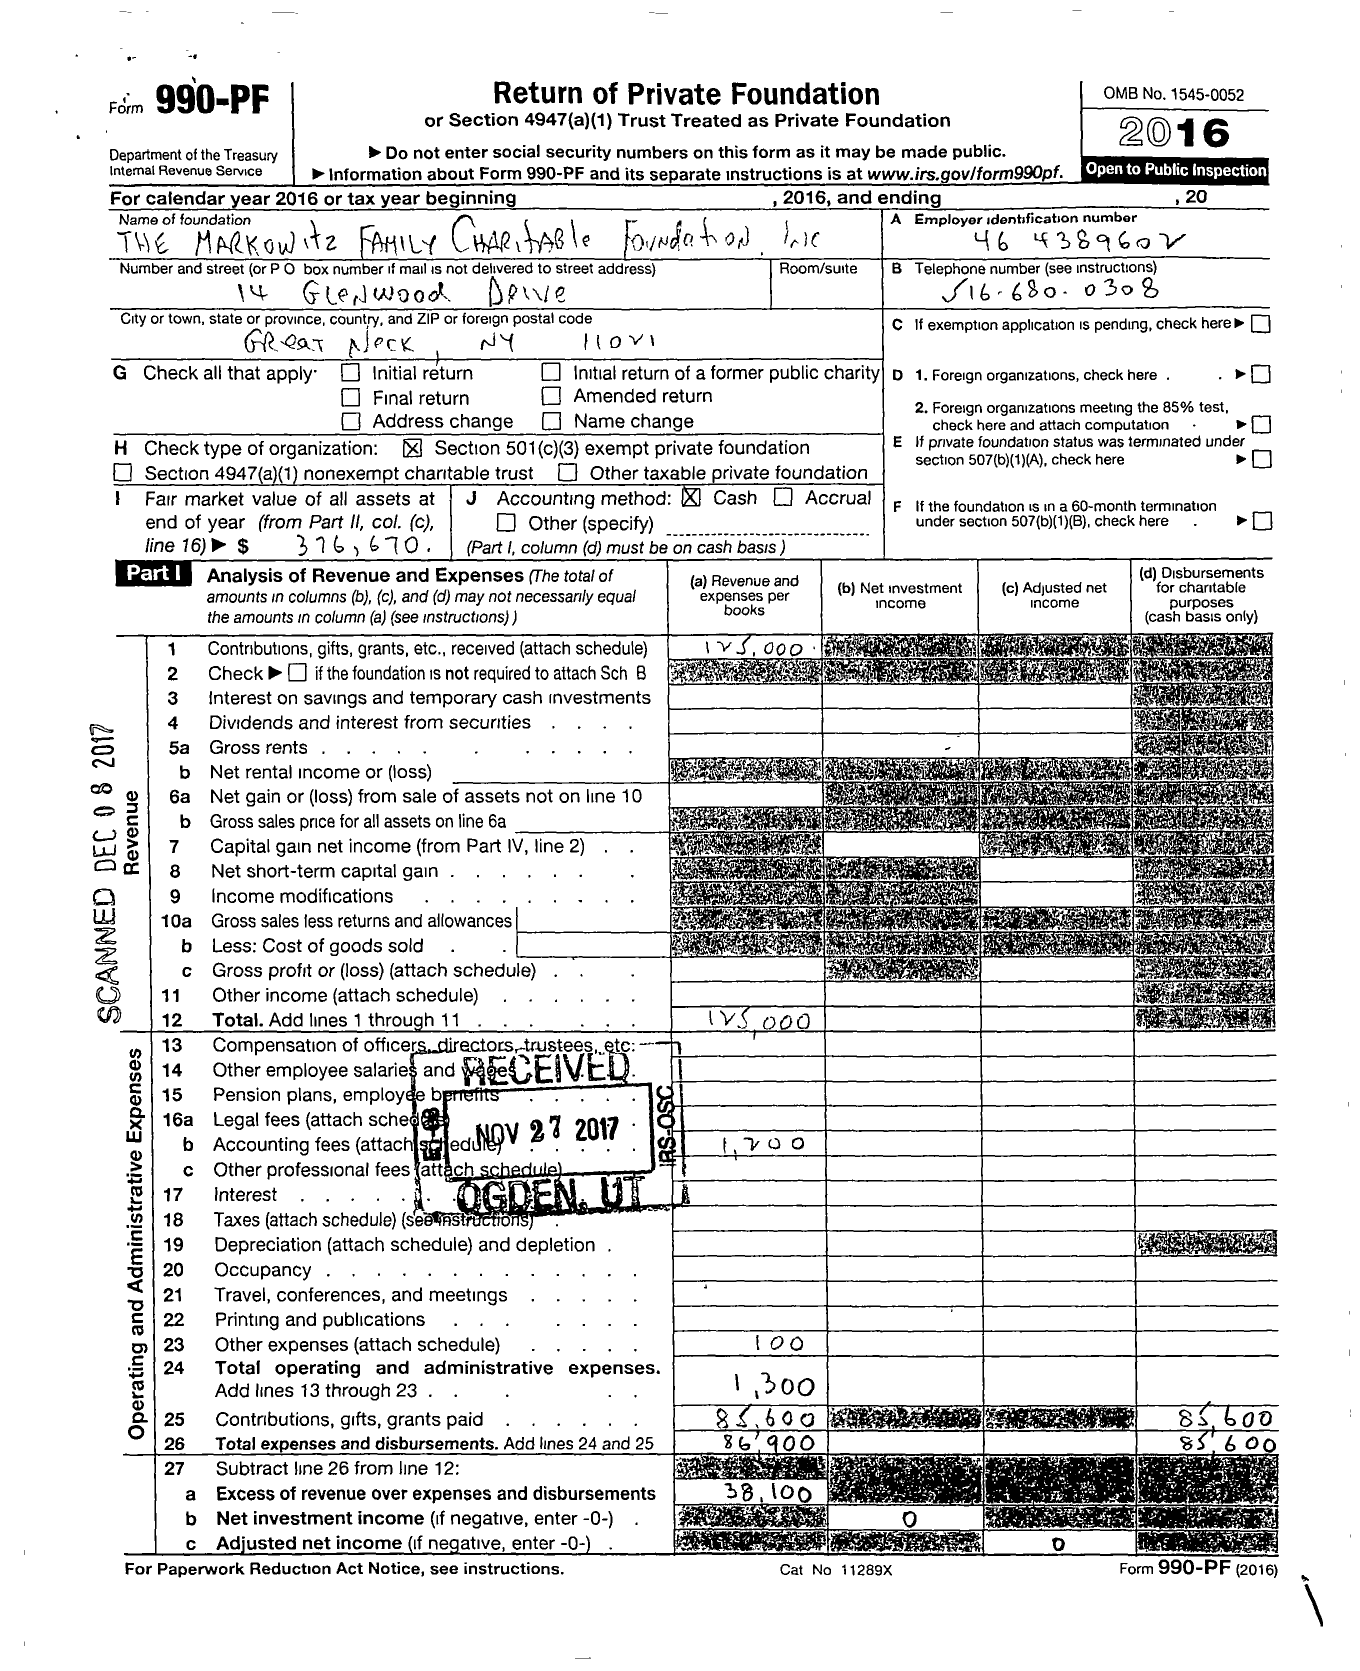 Image of first page of 2016 Form 990PF for The Markowitz Family Charitable Foundation